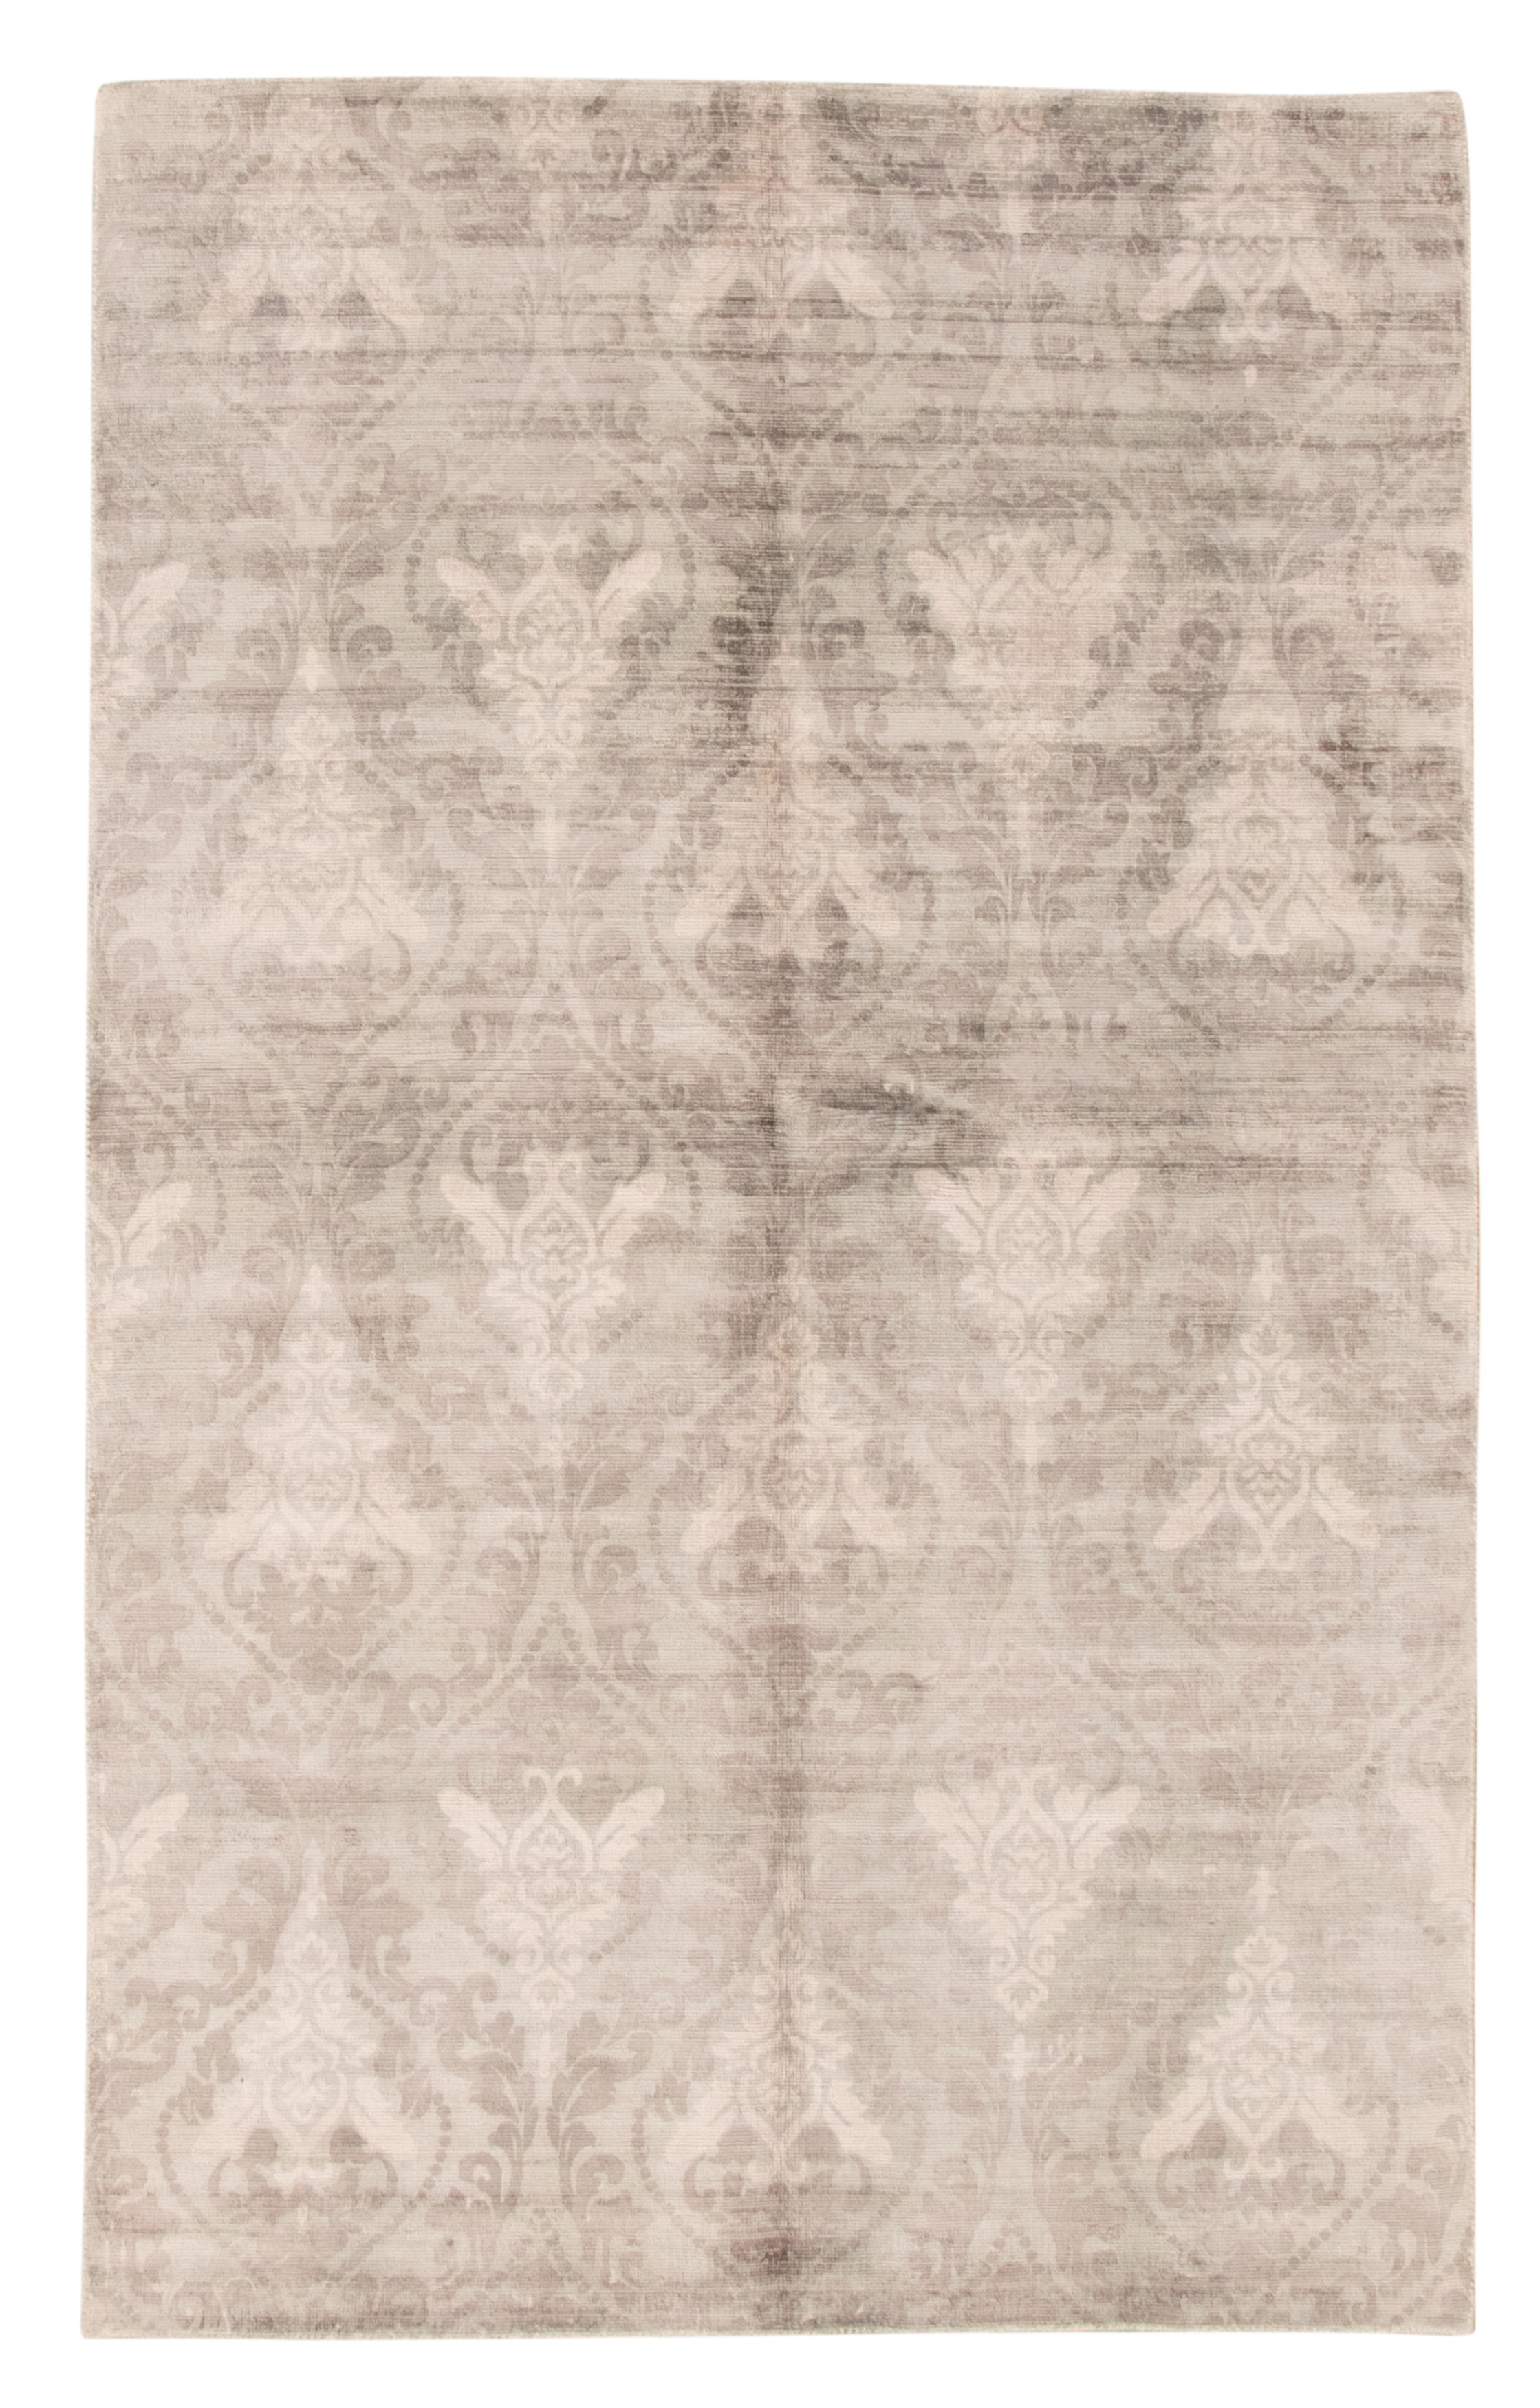 Hand loomed Galleria Ivory Viscose Rug 4'11" x 7'10" Size: 4'11" x 7'10"  